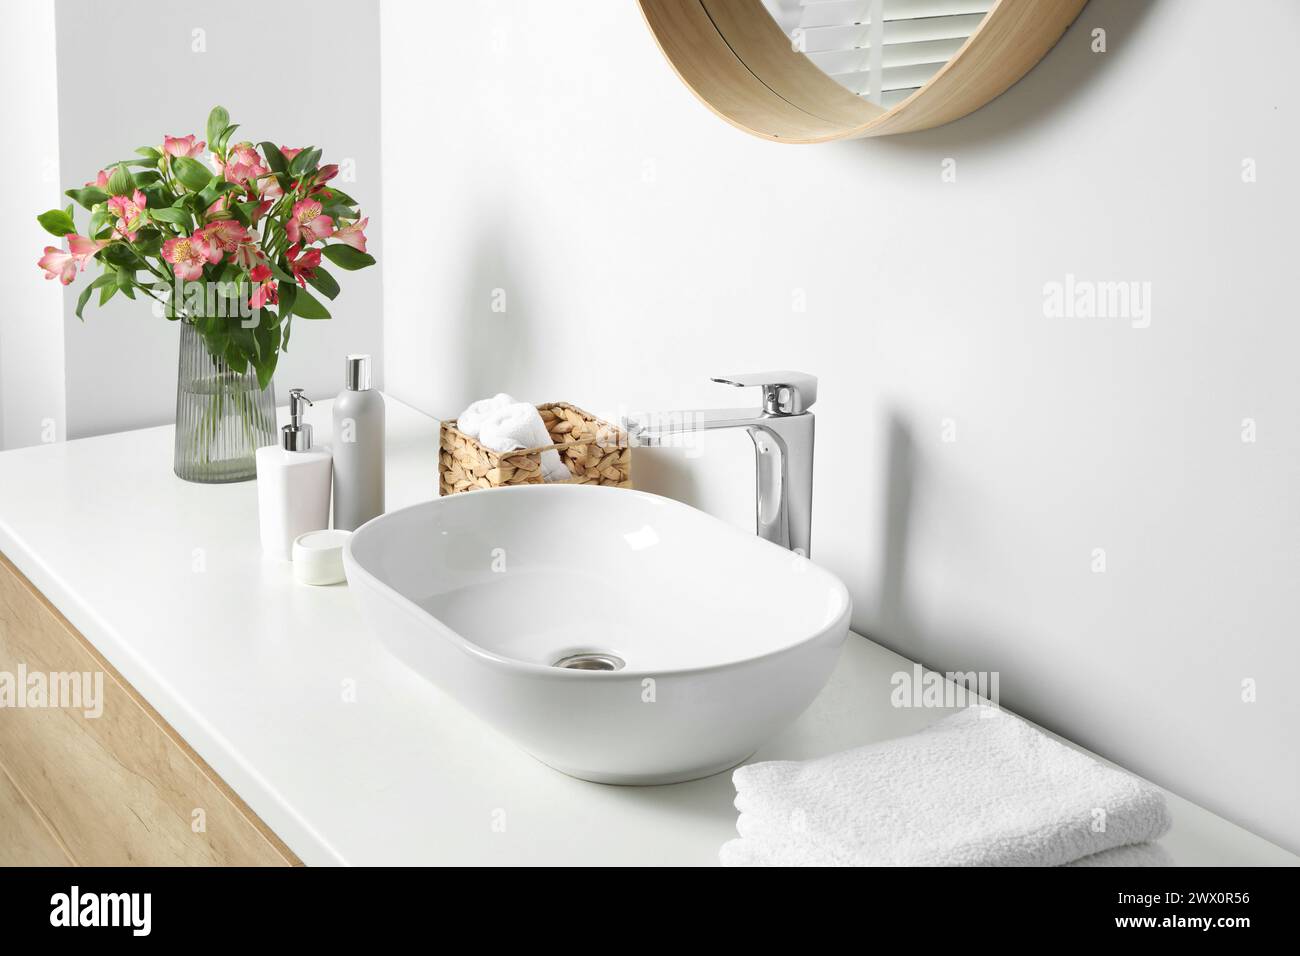 Vase with beautiful Alstroemeria flowers and toiletries near sink in bathroom Stock Photo